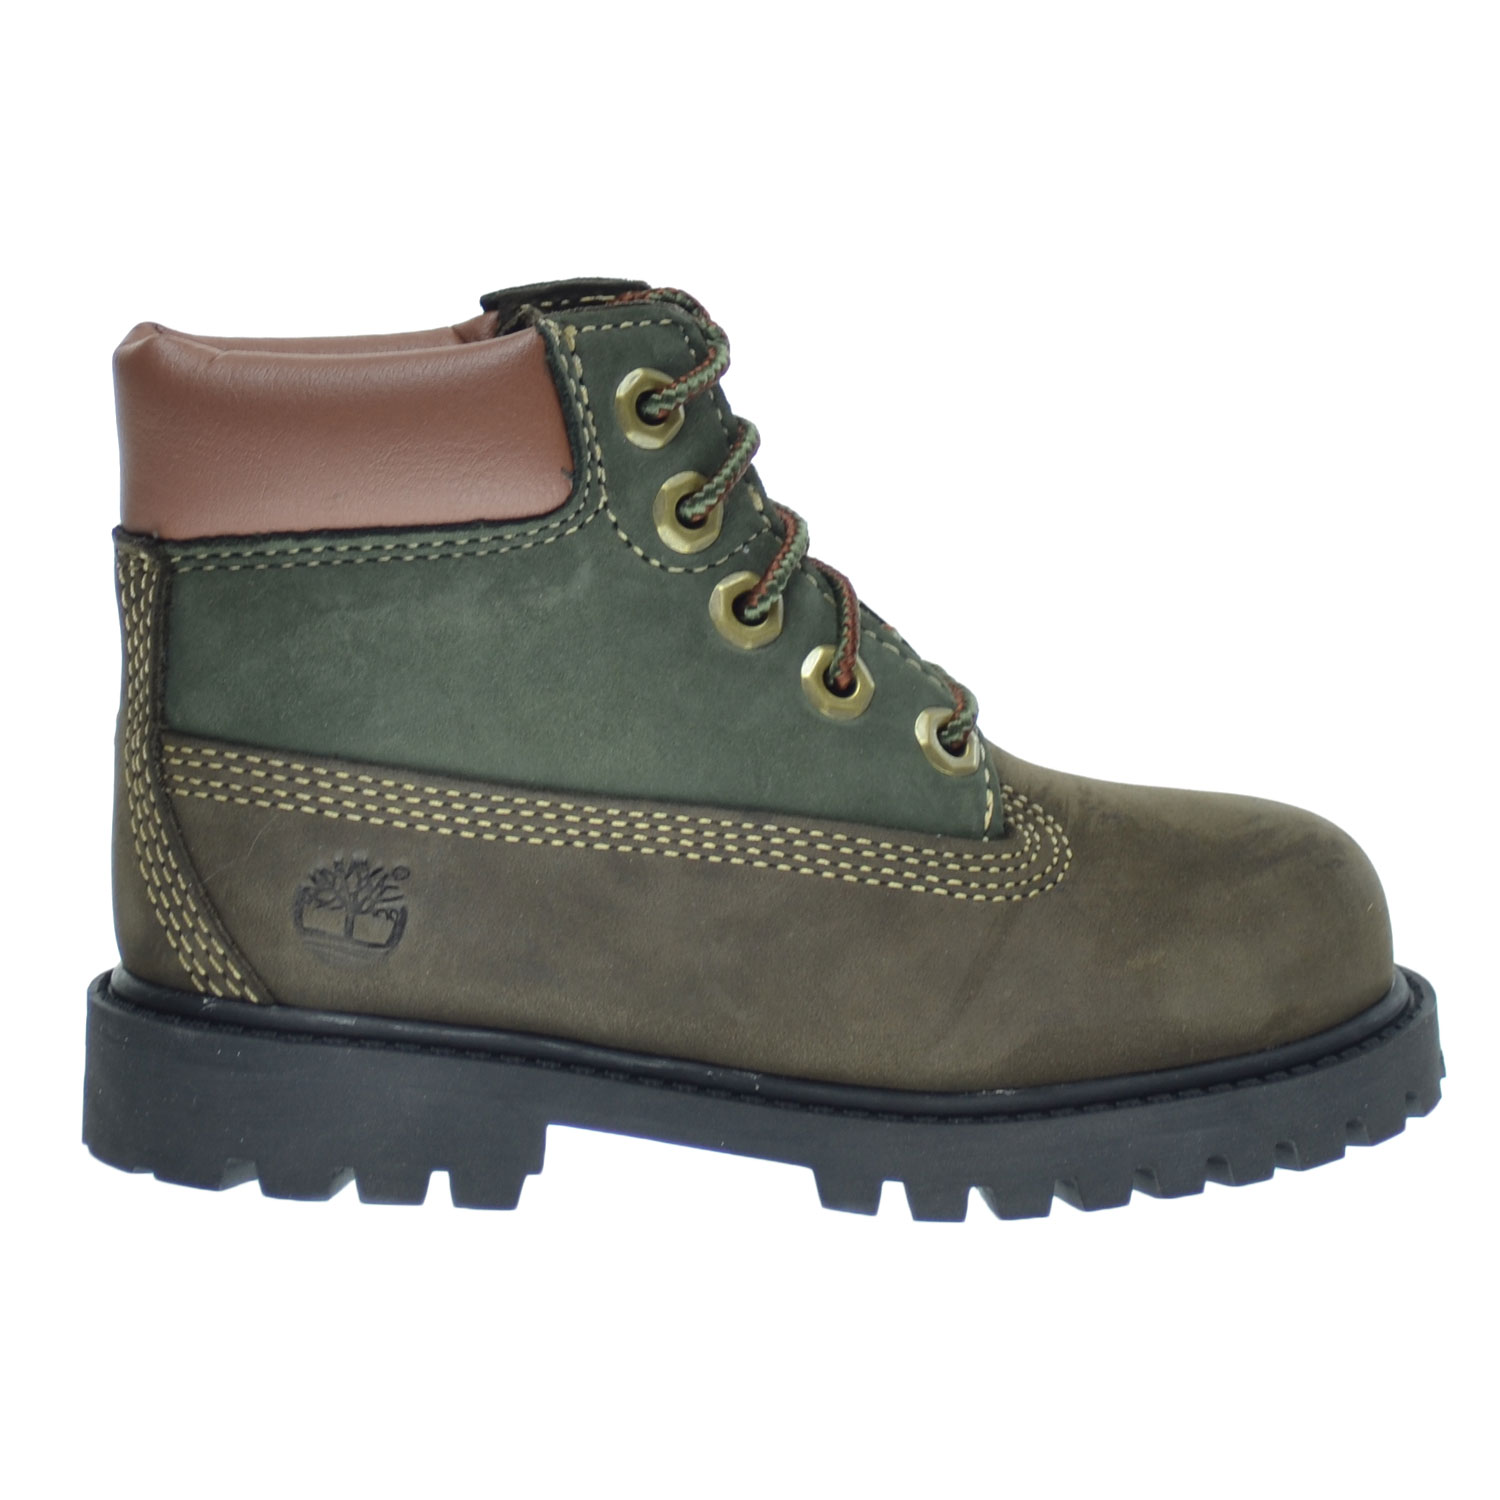 Timberland 6 Inch Premium Waterproof Toddlers-Infants Boots Brown-Green ...